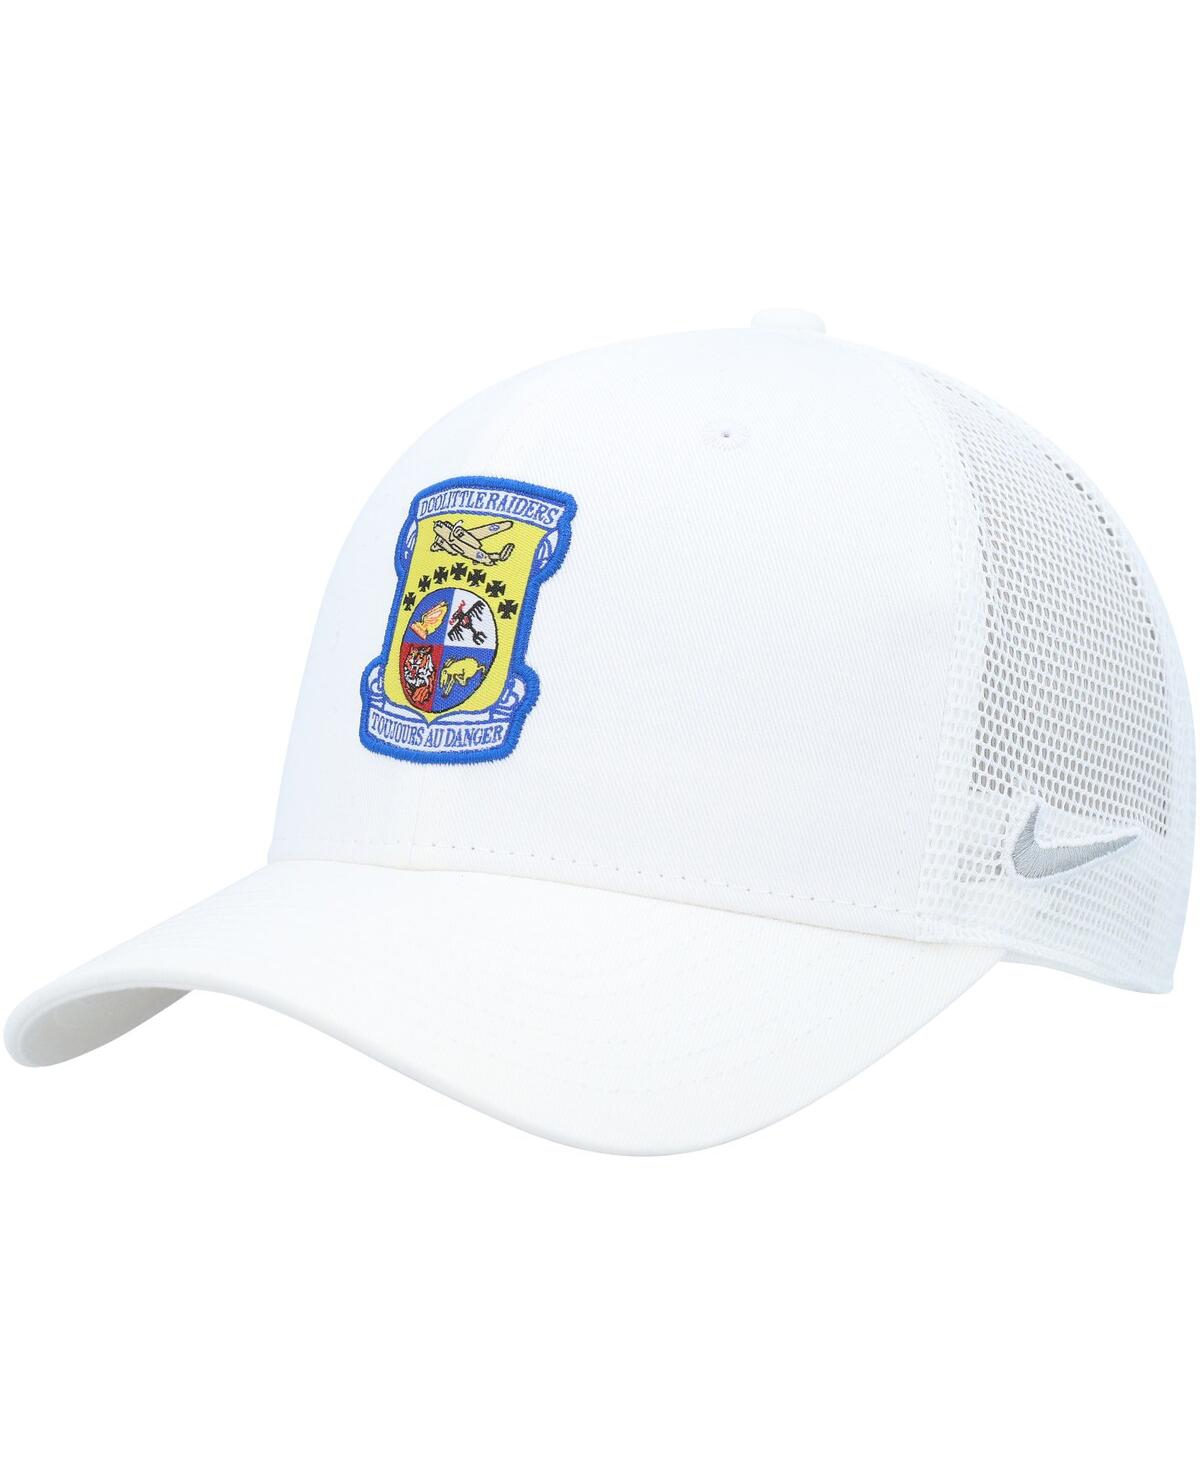 Nike Men's  White Air Force Falcons Rivalry Classic99 Trucker Adjustable Hat